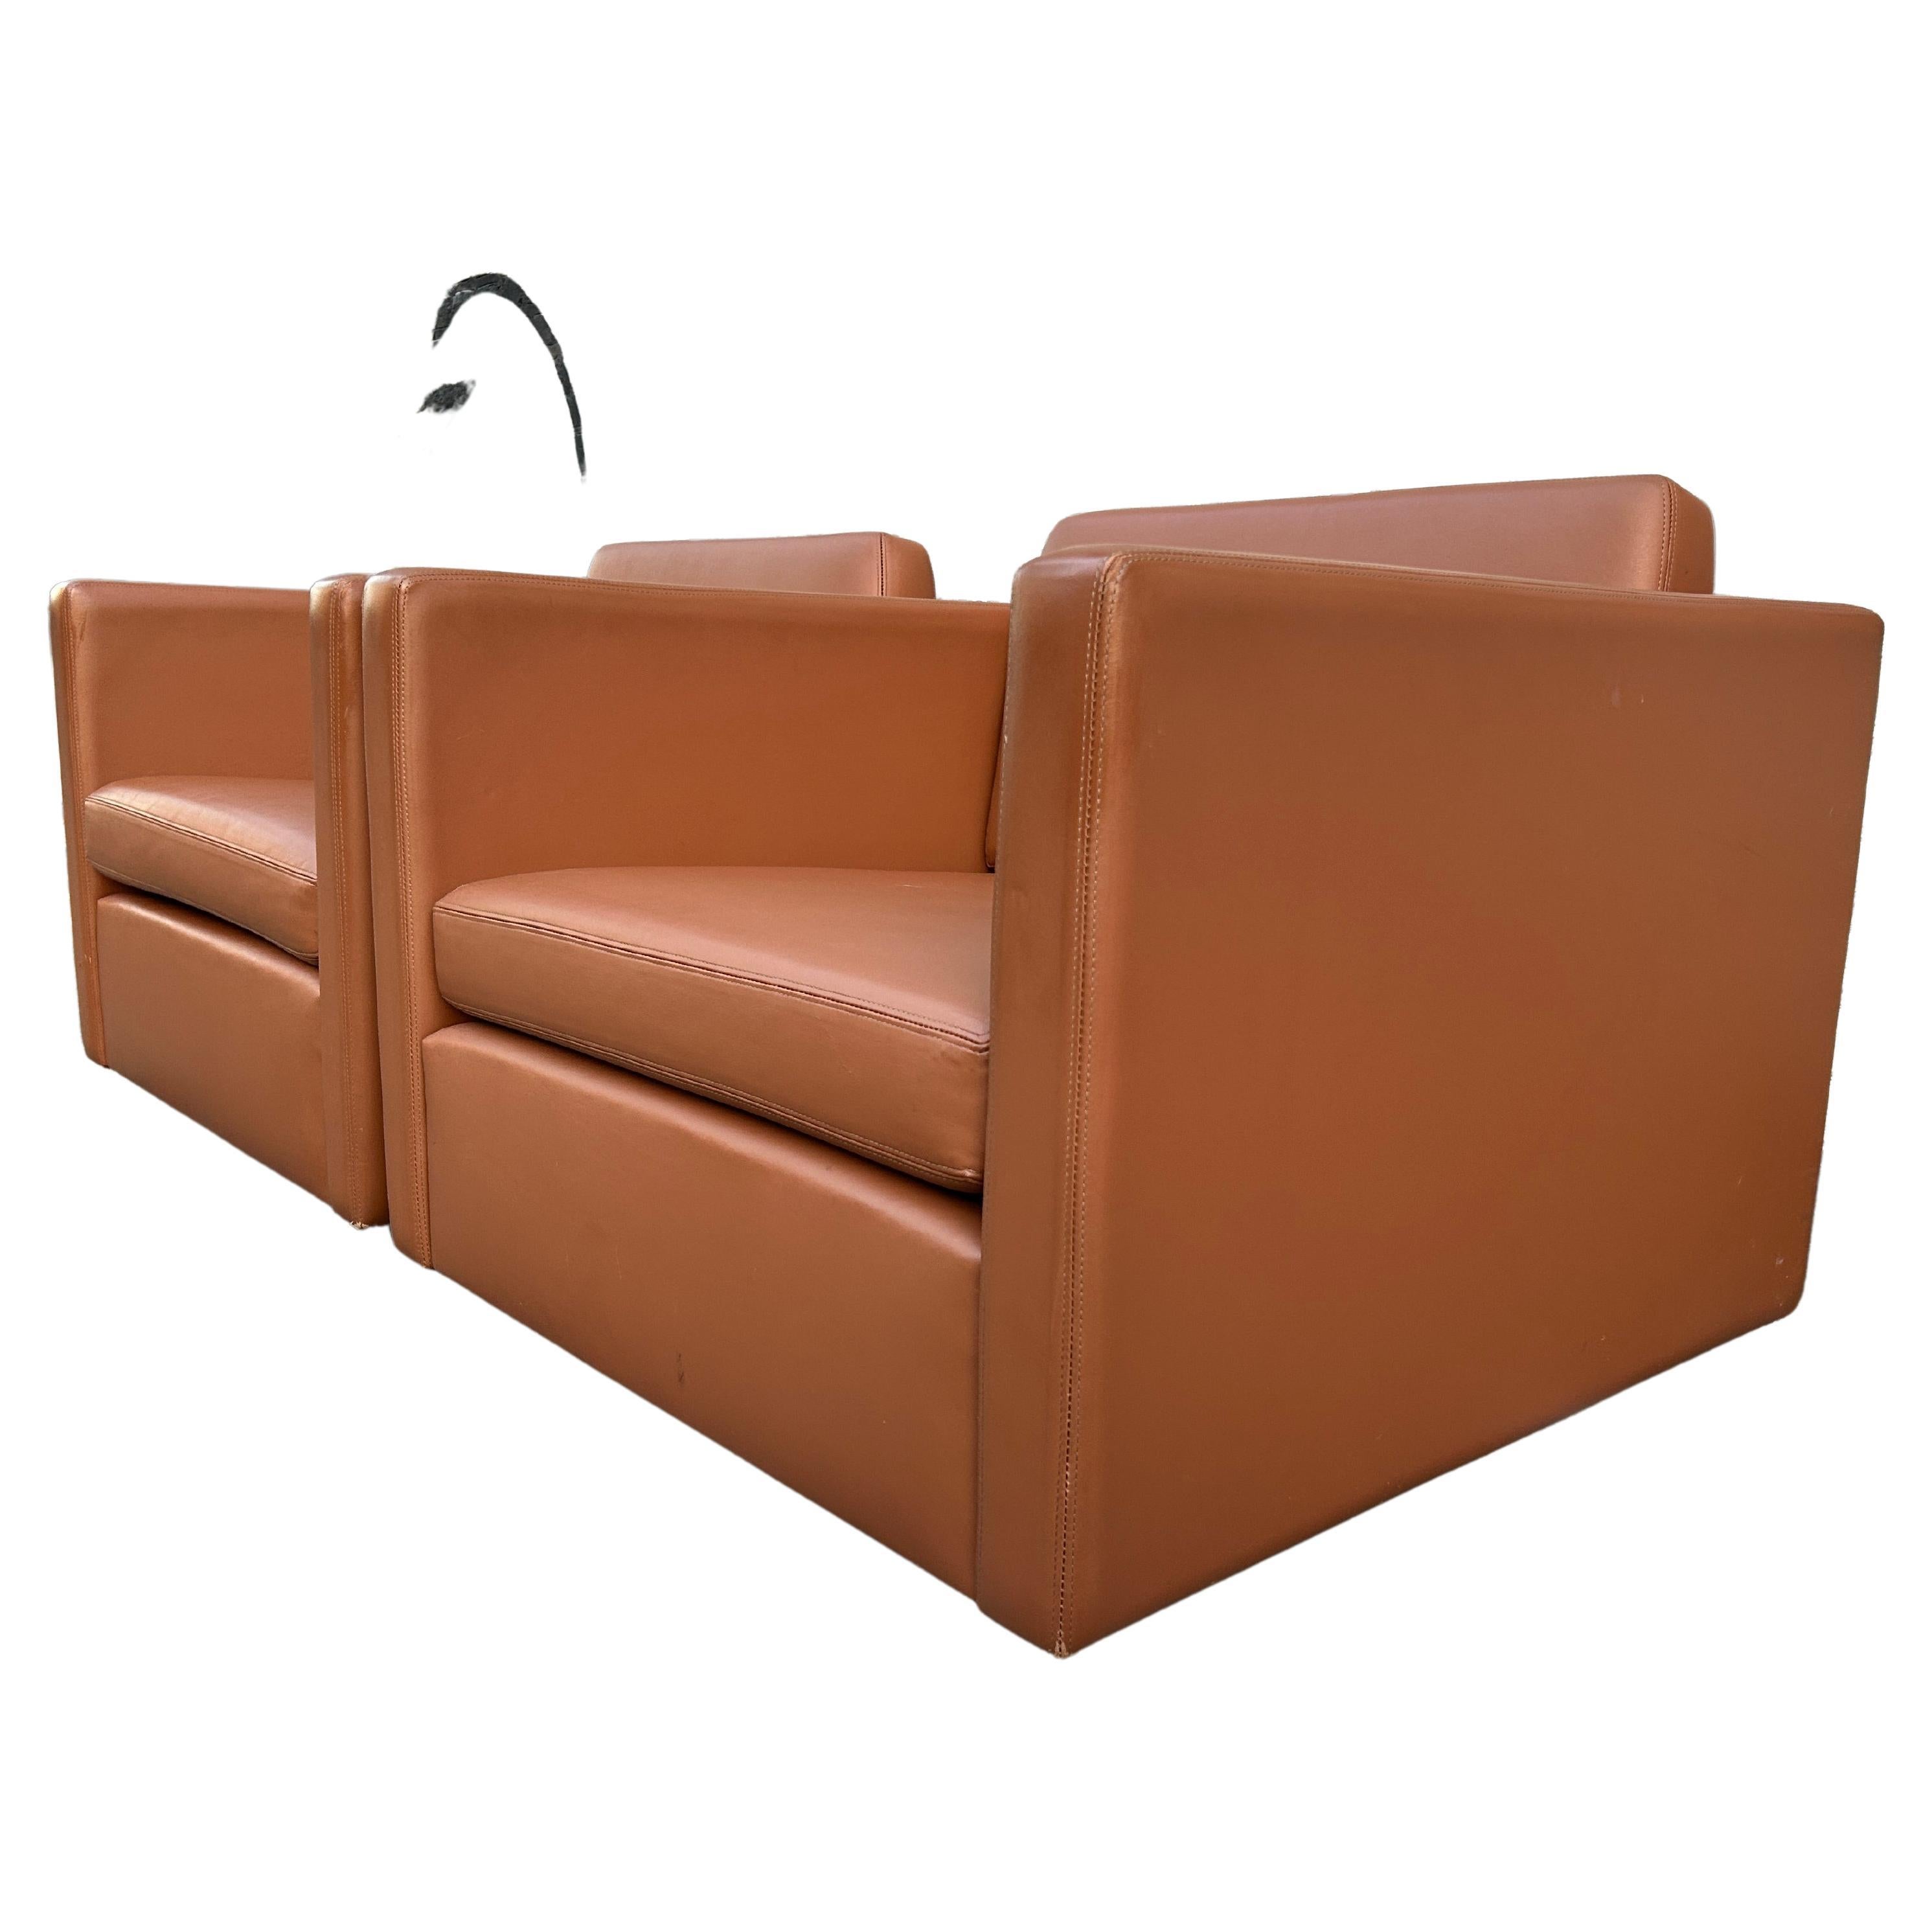 American Superb Mid-Century Modern Pfister Cube Lounge Chairs by Knoll in Cognac Leather For Sale